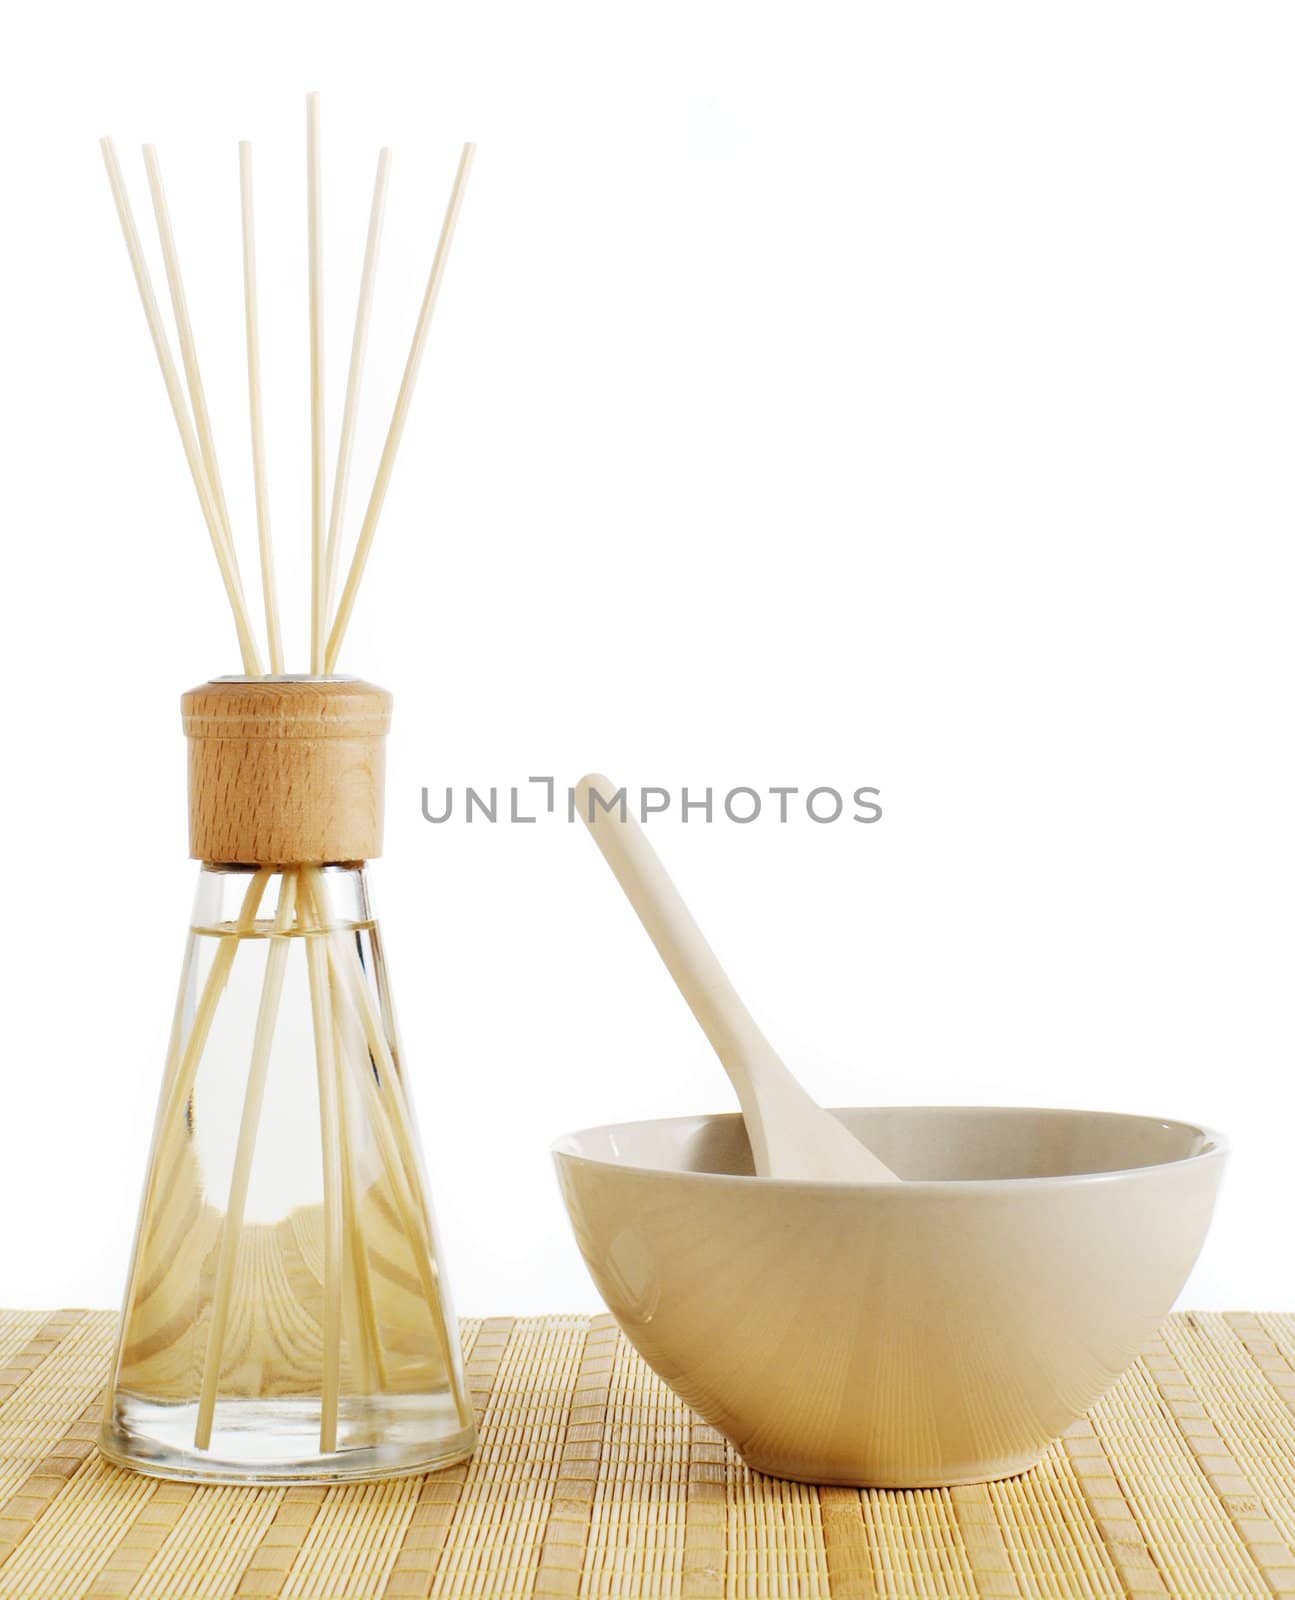 Reed diffuser and bowl of treatment against a white background.